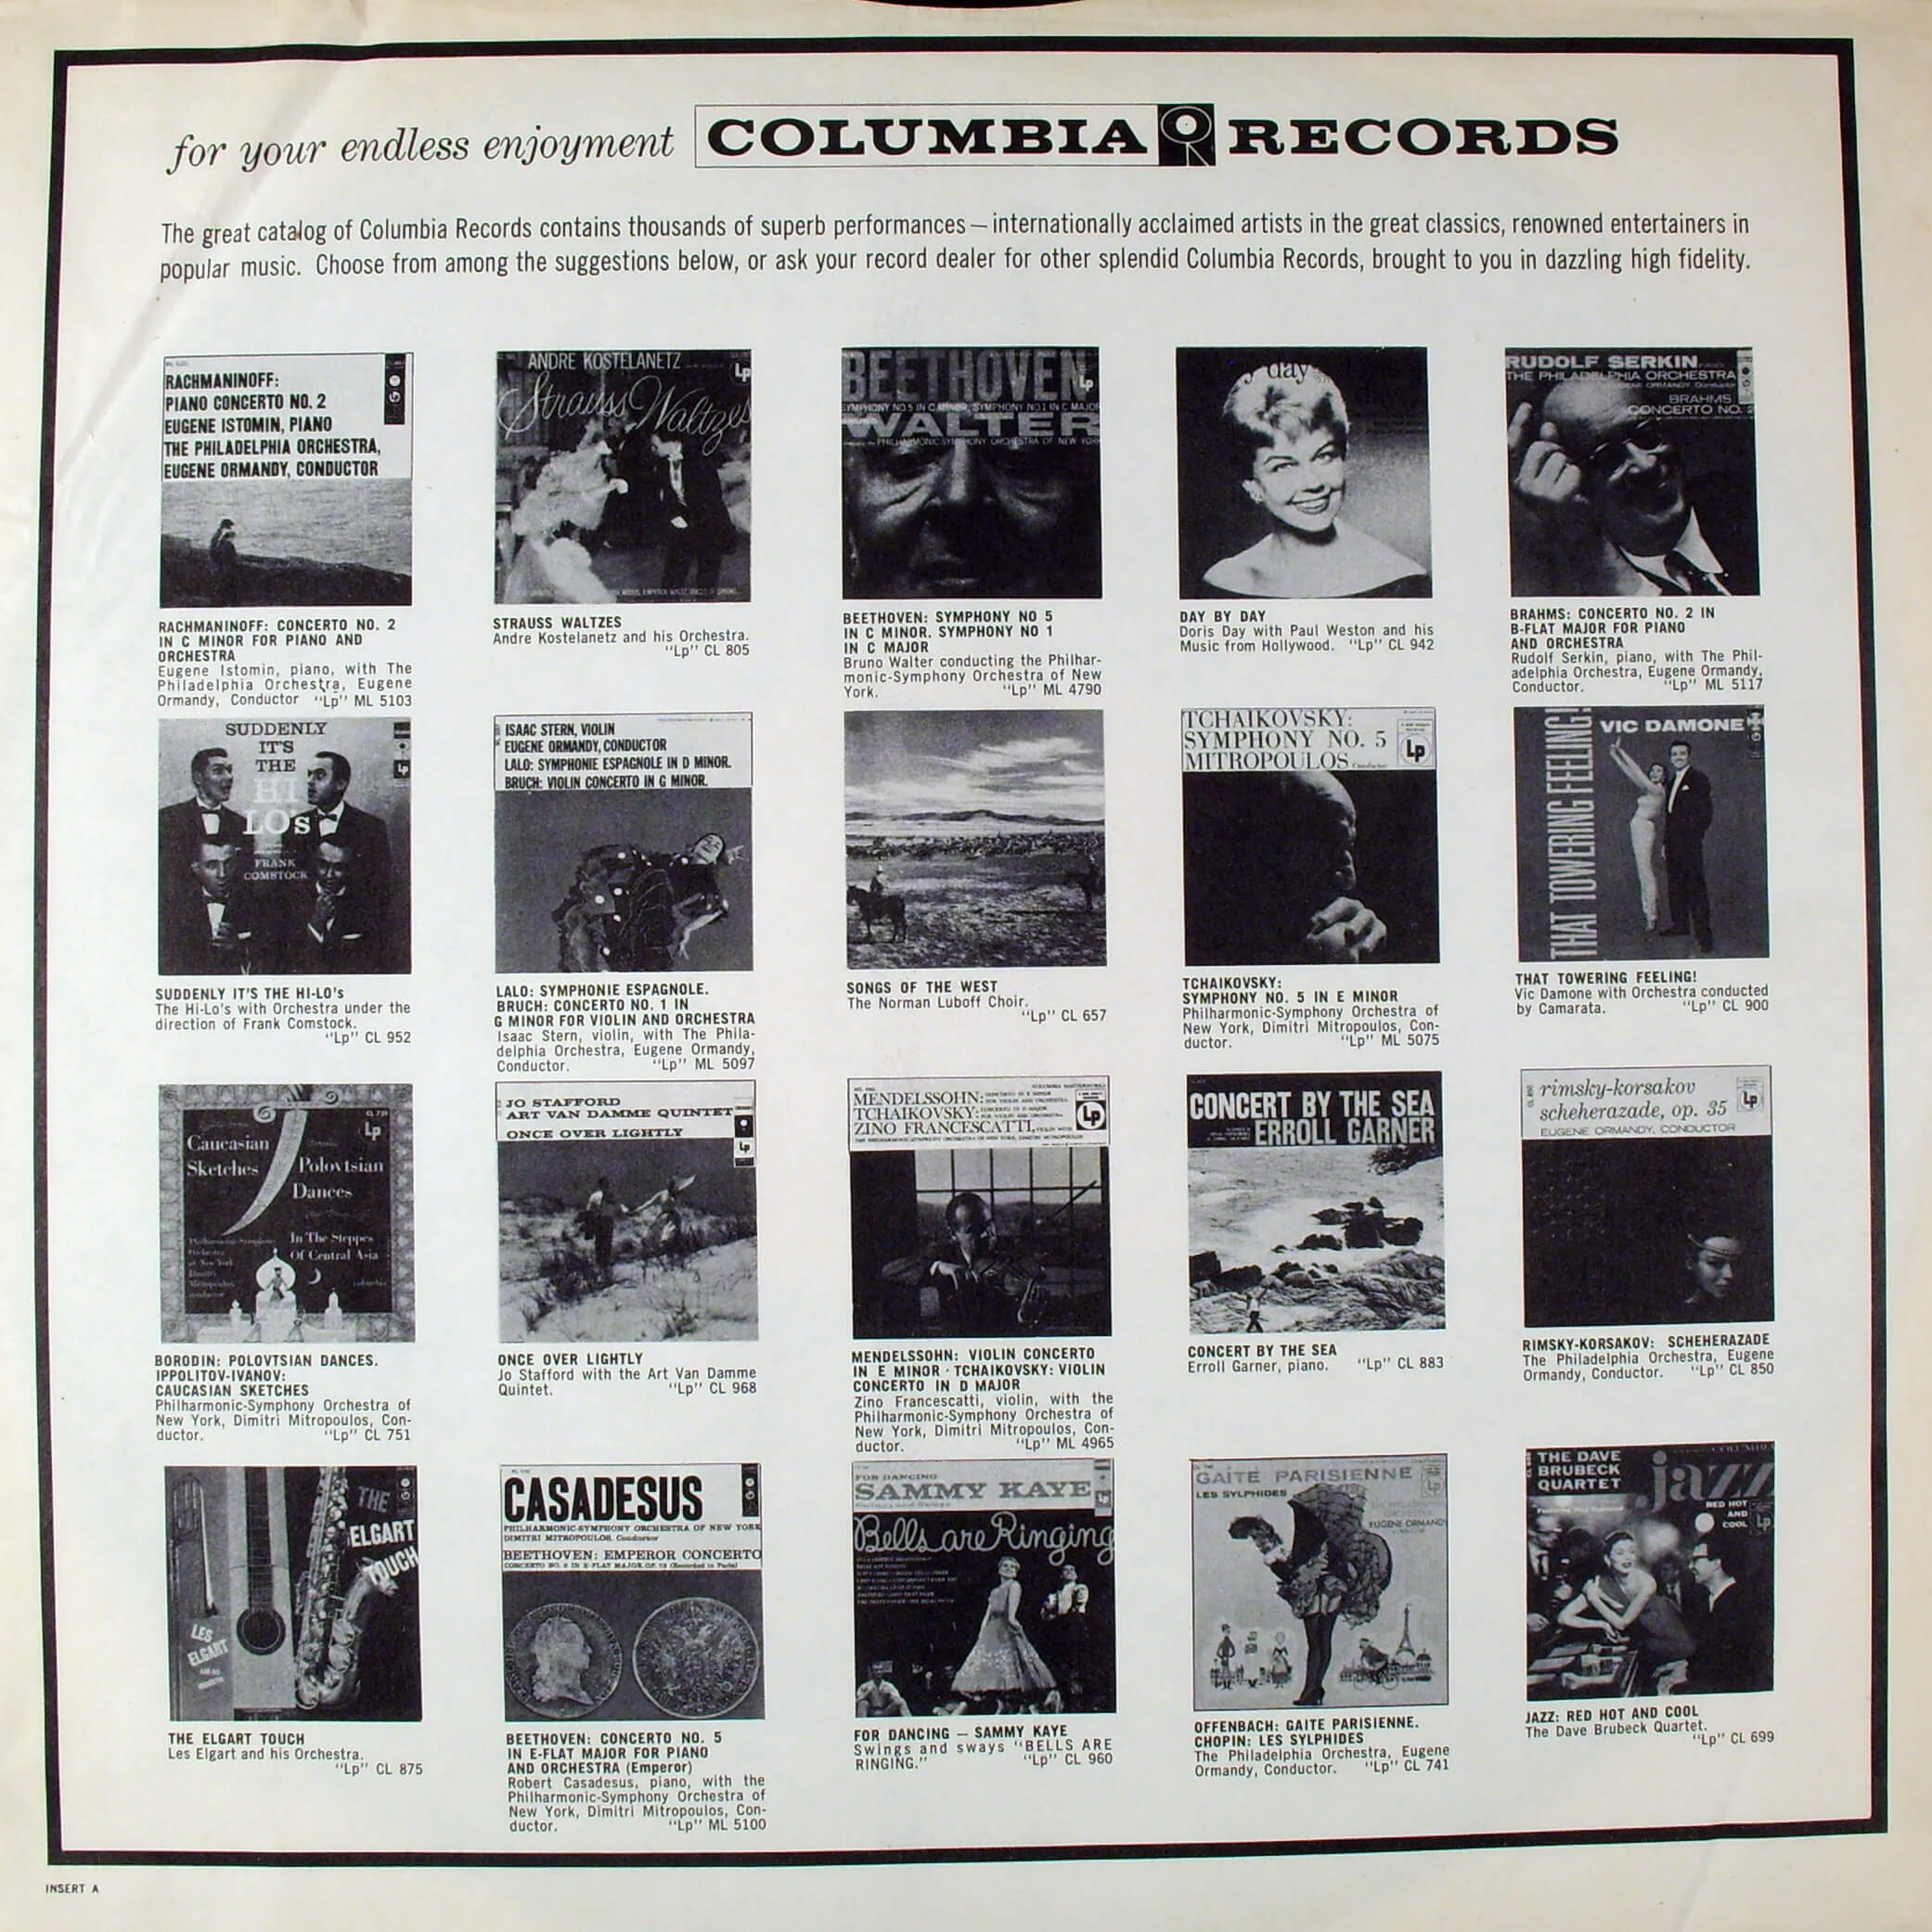 how-to-care-for-vinyl-records-according-to-columbia-records-in-1957-front